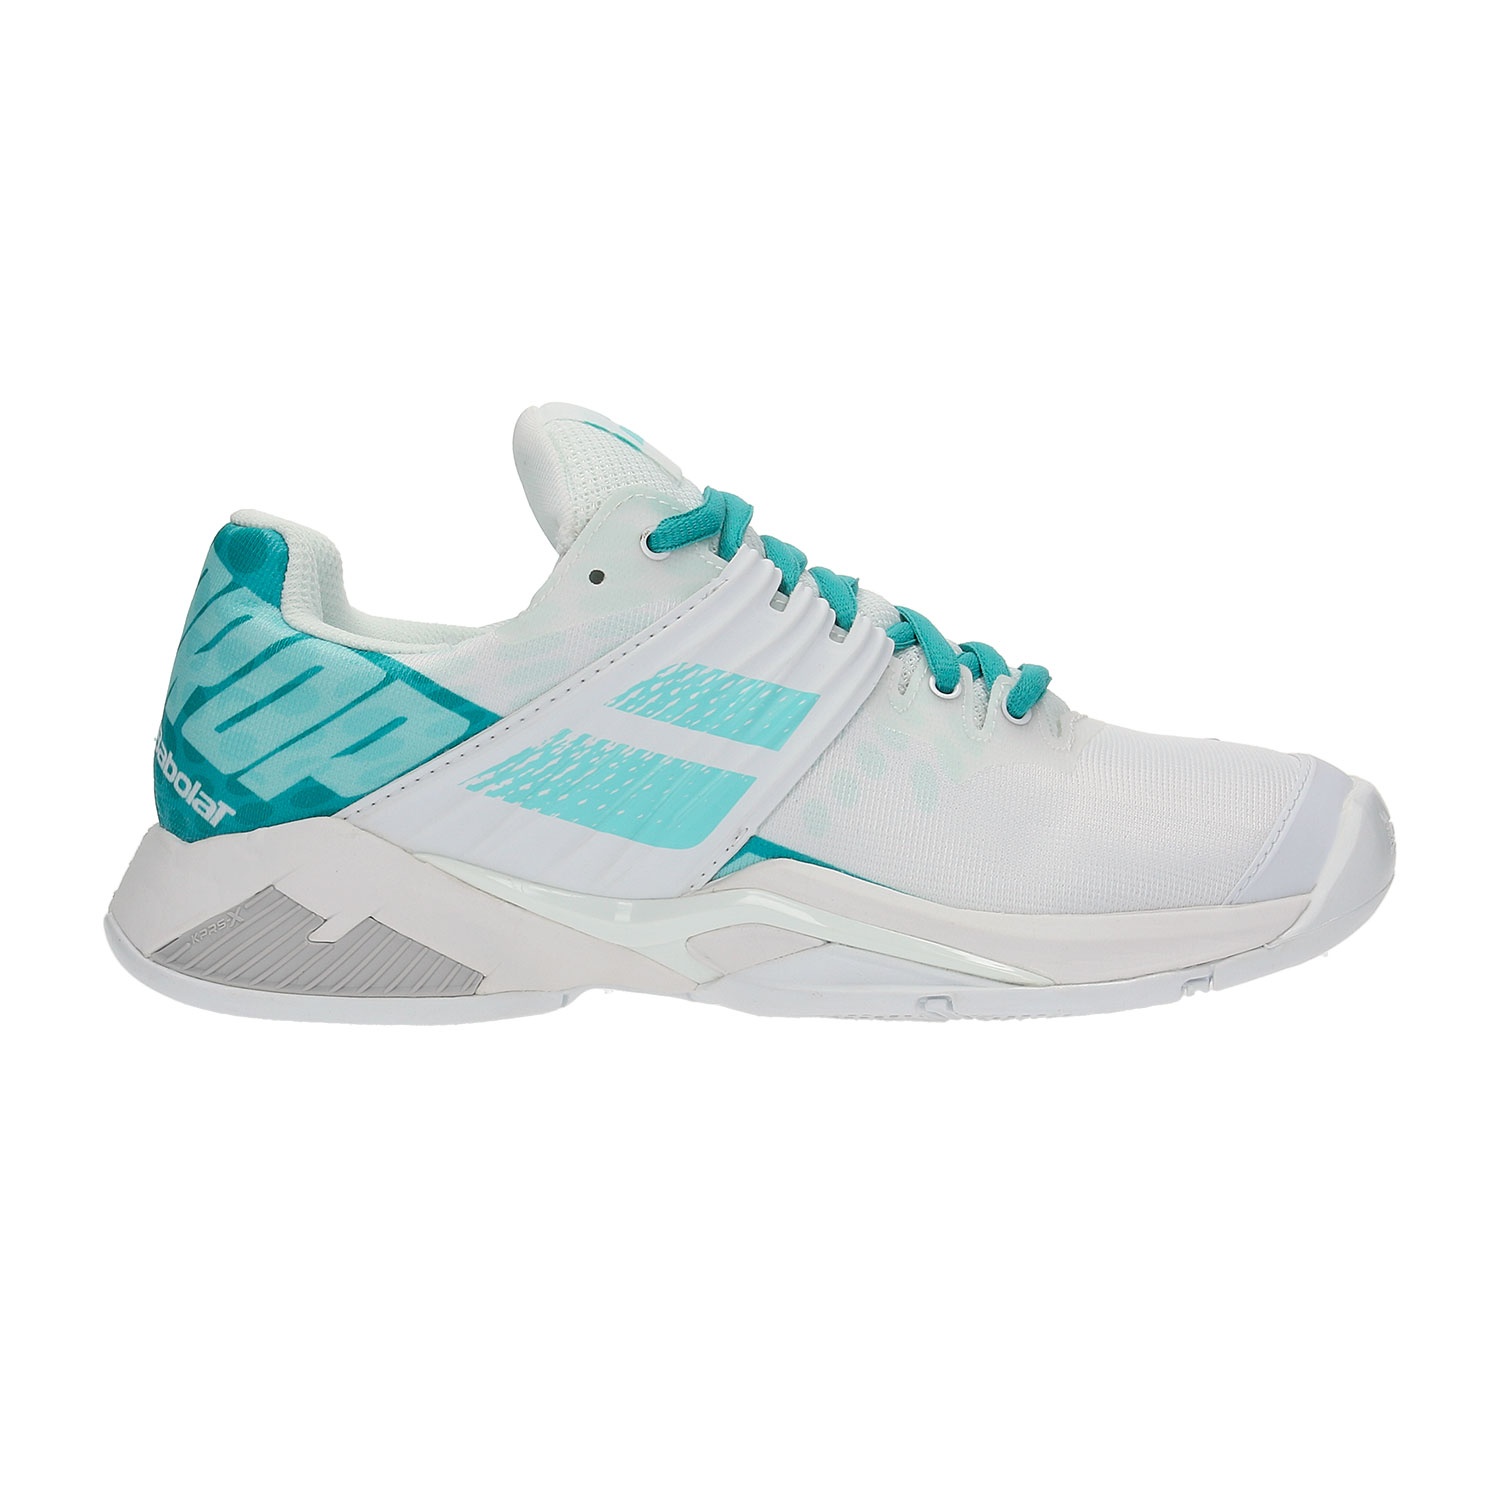 Babolat Propulse Fury All Court Zapatillas Tenis Mujer White